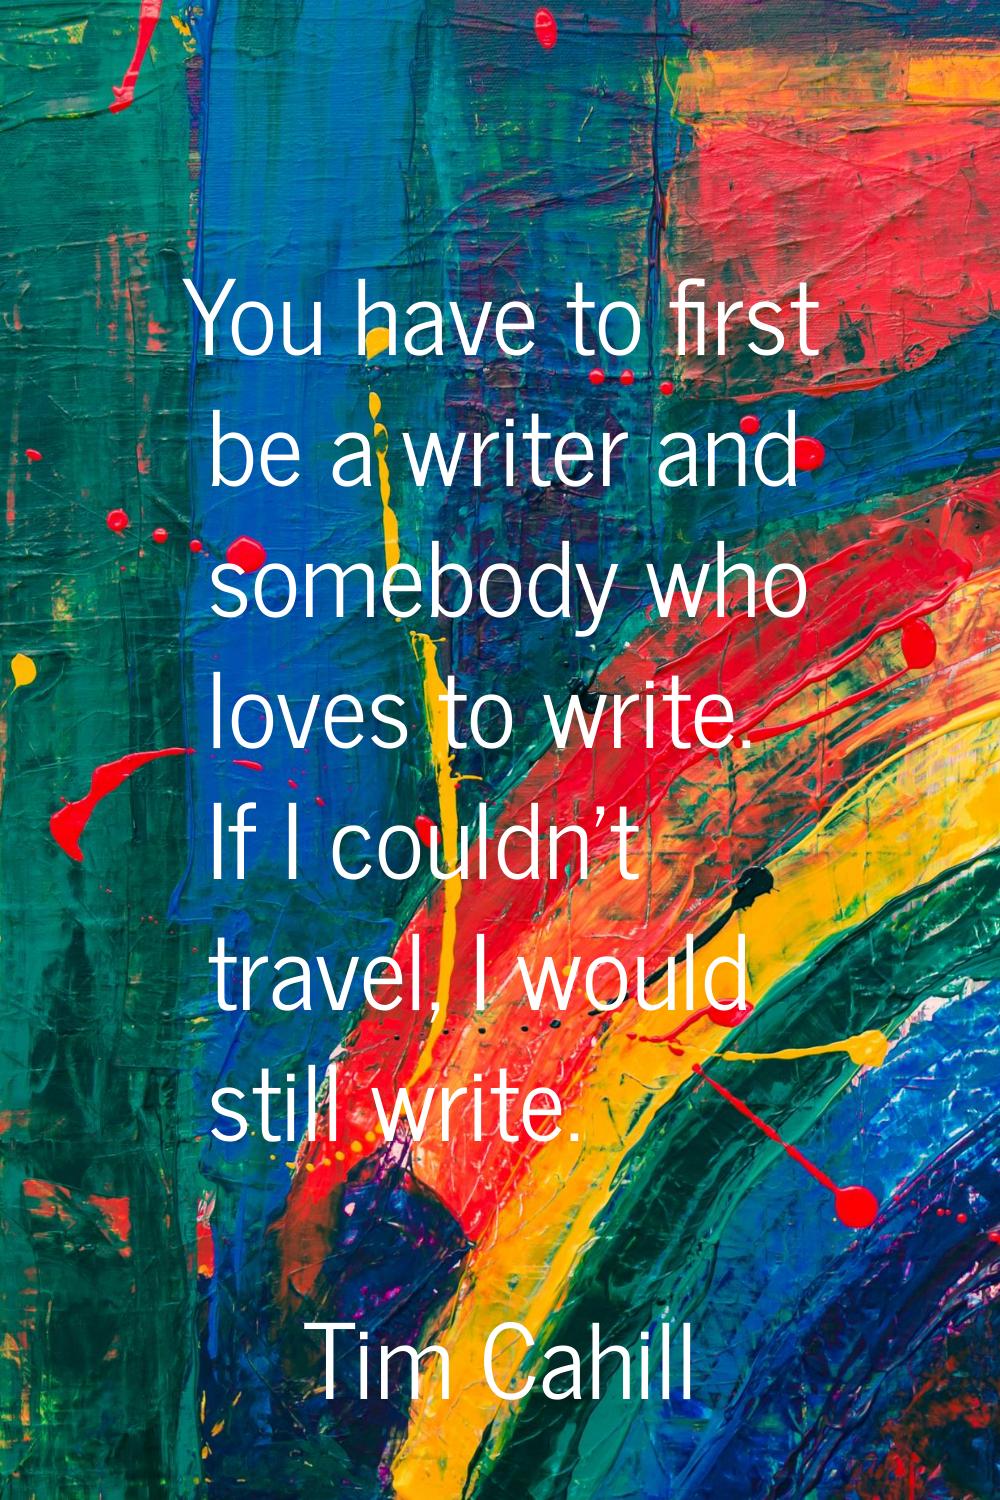 You have to first be a writer and somebody who loves to write. If I couldn't travel, I would still 